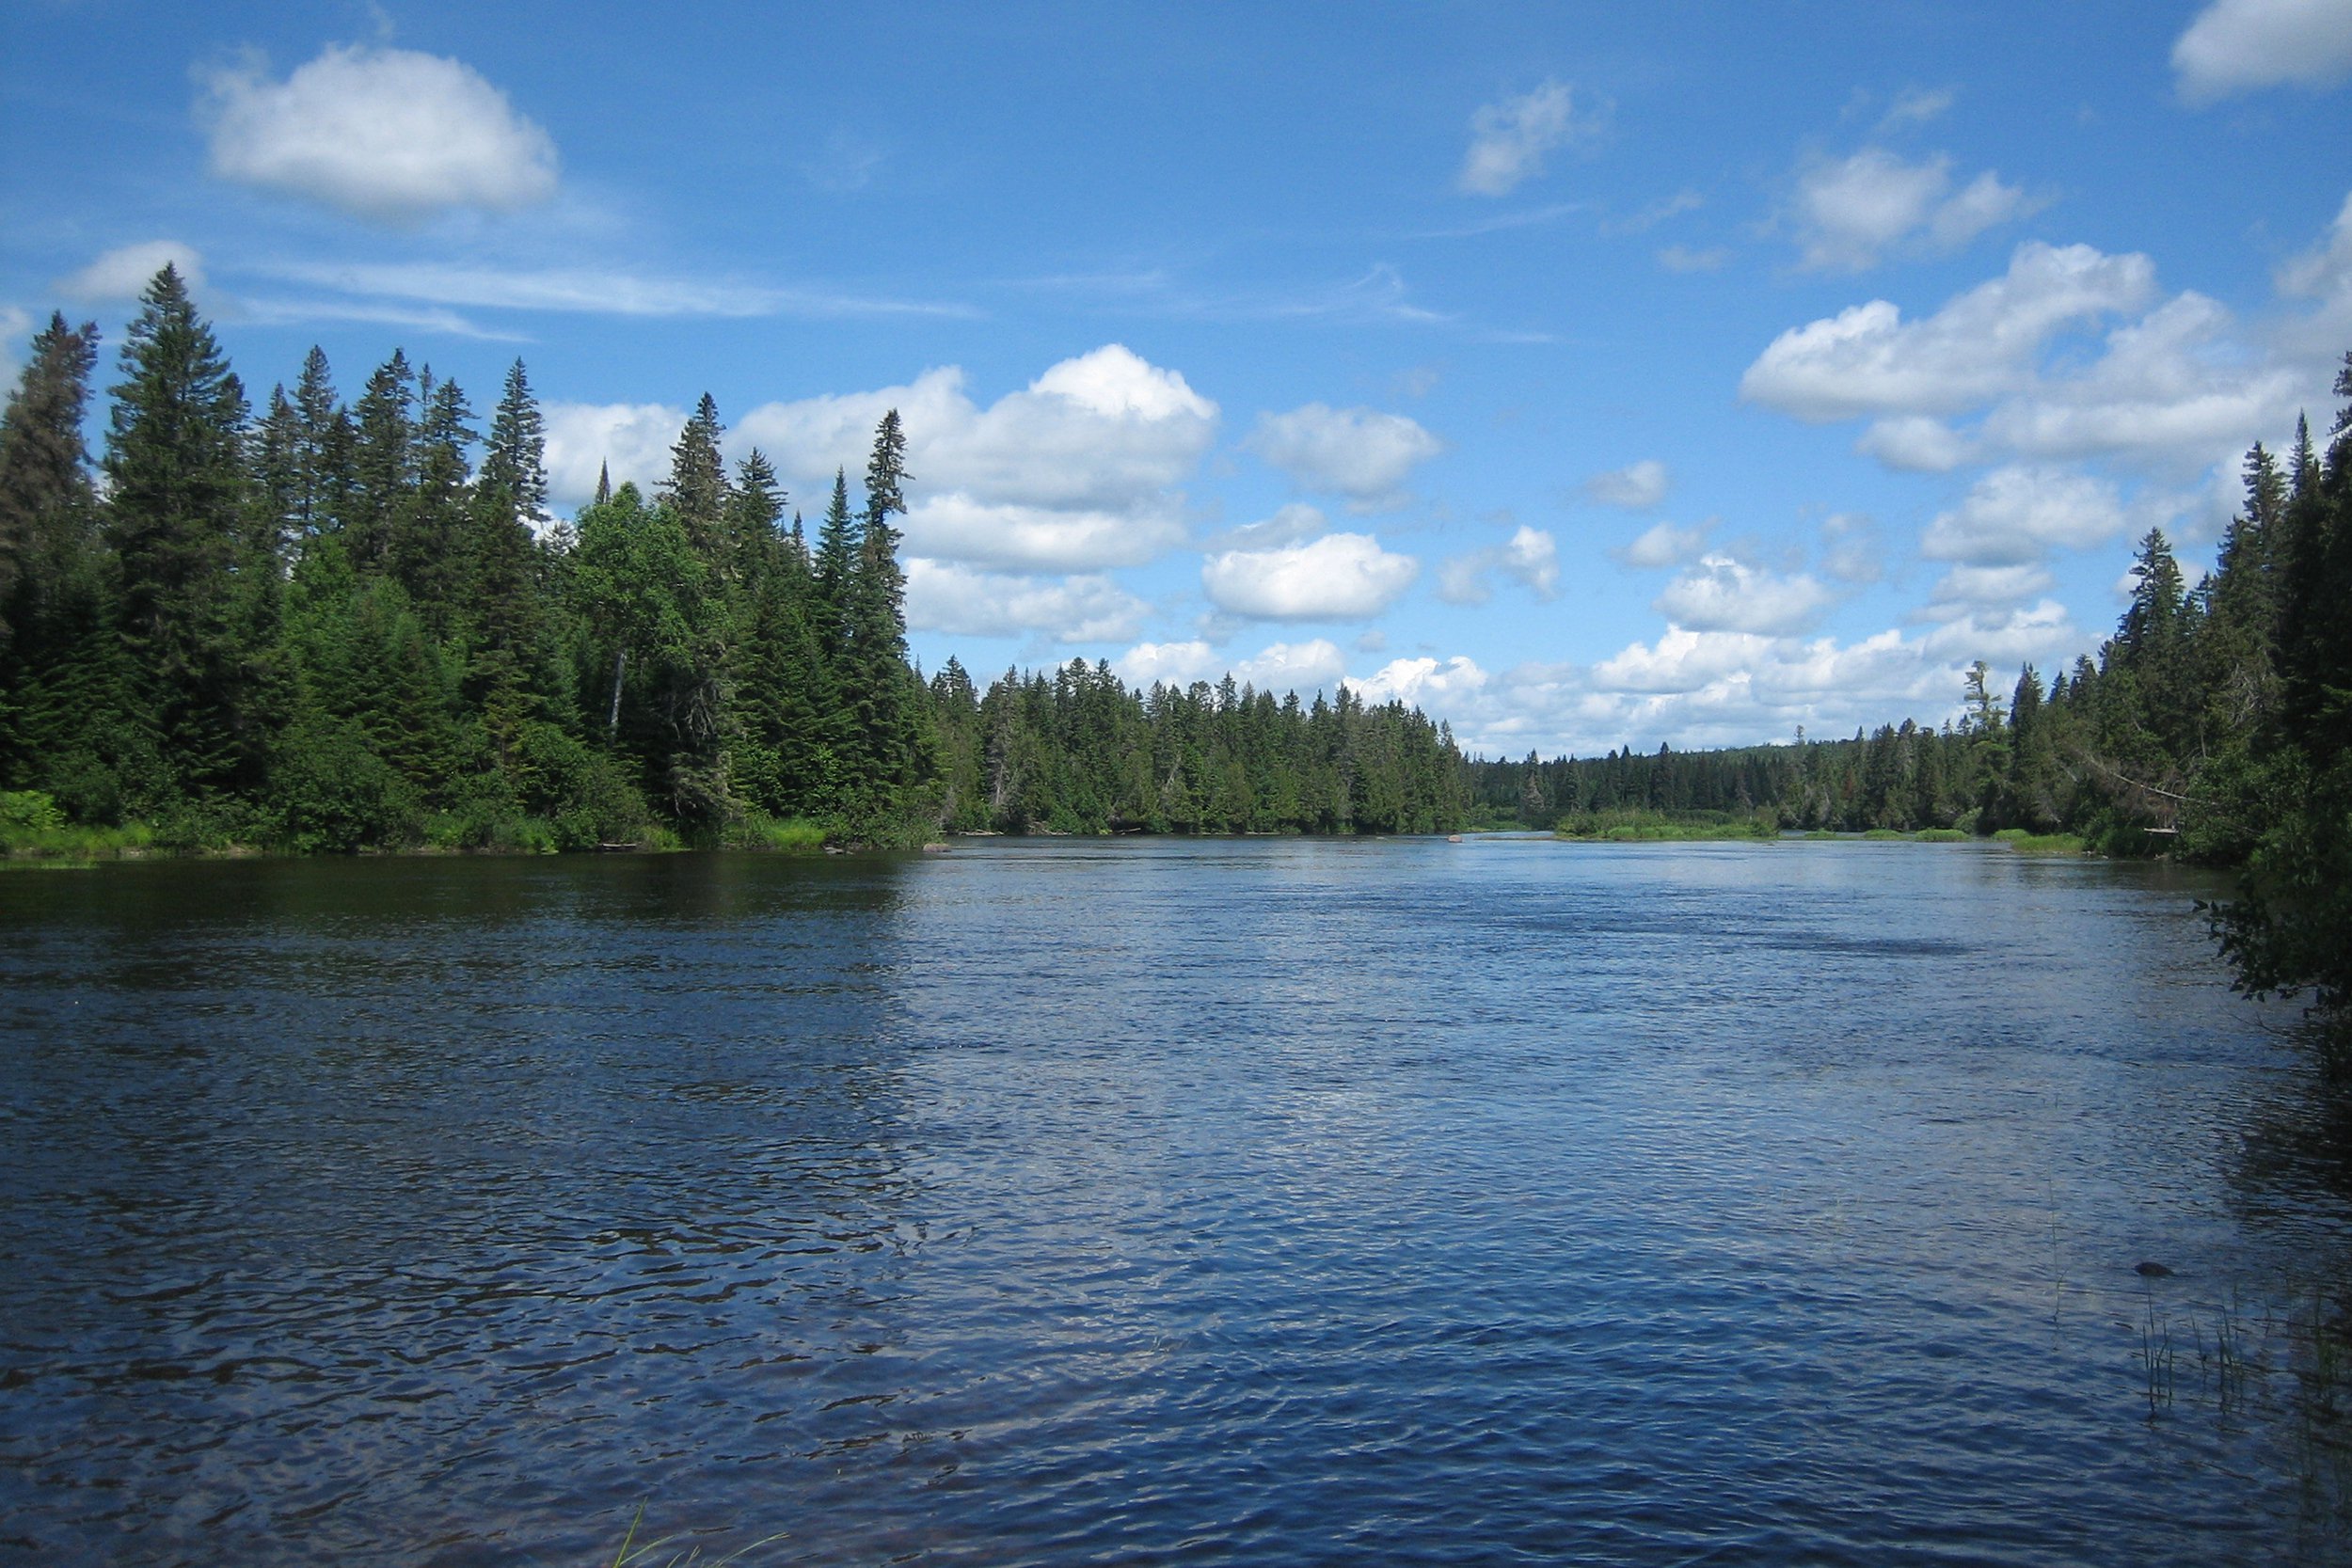 <p>A tributary of the St. John's River, the <a href="https://www.nrcm.org/projects/forests-wildlife/allagash-wilderness-waterway/">Allagash River and Waterway</a> is a genuine wilderness experience in the remote wilds of Maine, so plan well before you go. The Allagash's pristine waters aren't known for their diversity of fish species, but if you're okay with whitefish, brown trout, and lake trout, however, you'll be satisfied and then some. </p>